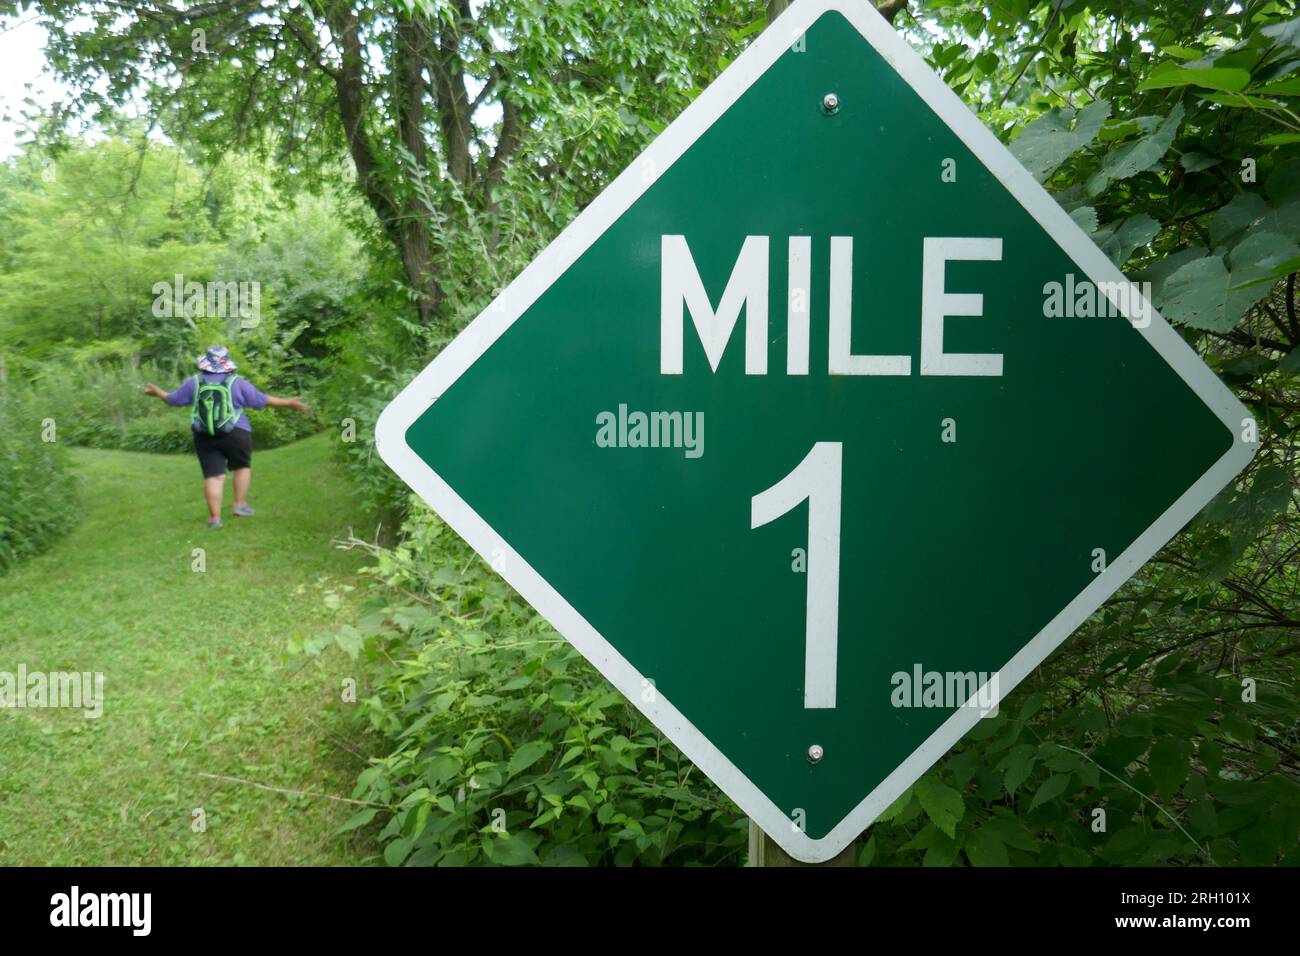 Mile 1 marker sign on hiking trail in nature park with blurred woman in background acting like she is lost Stock Photo